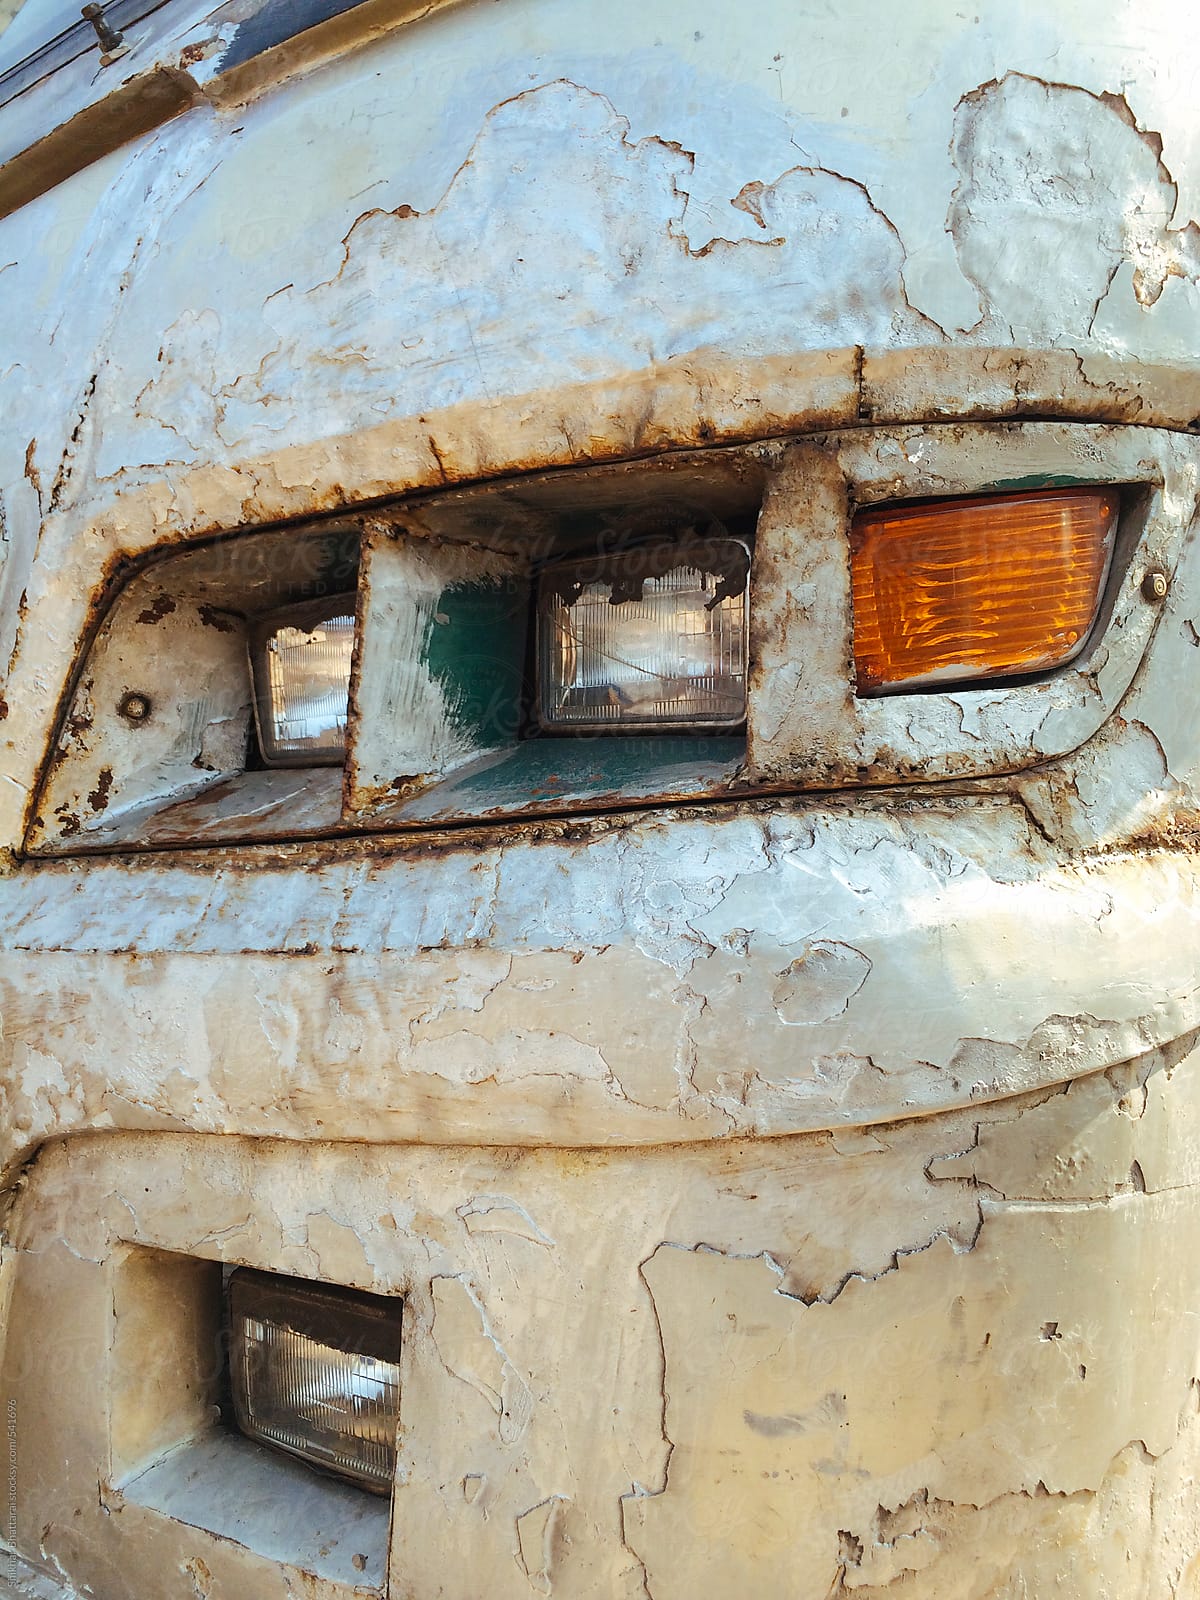 A banged up and reconstructed headlights of a bus.